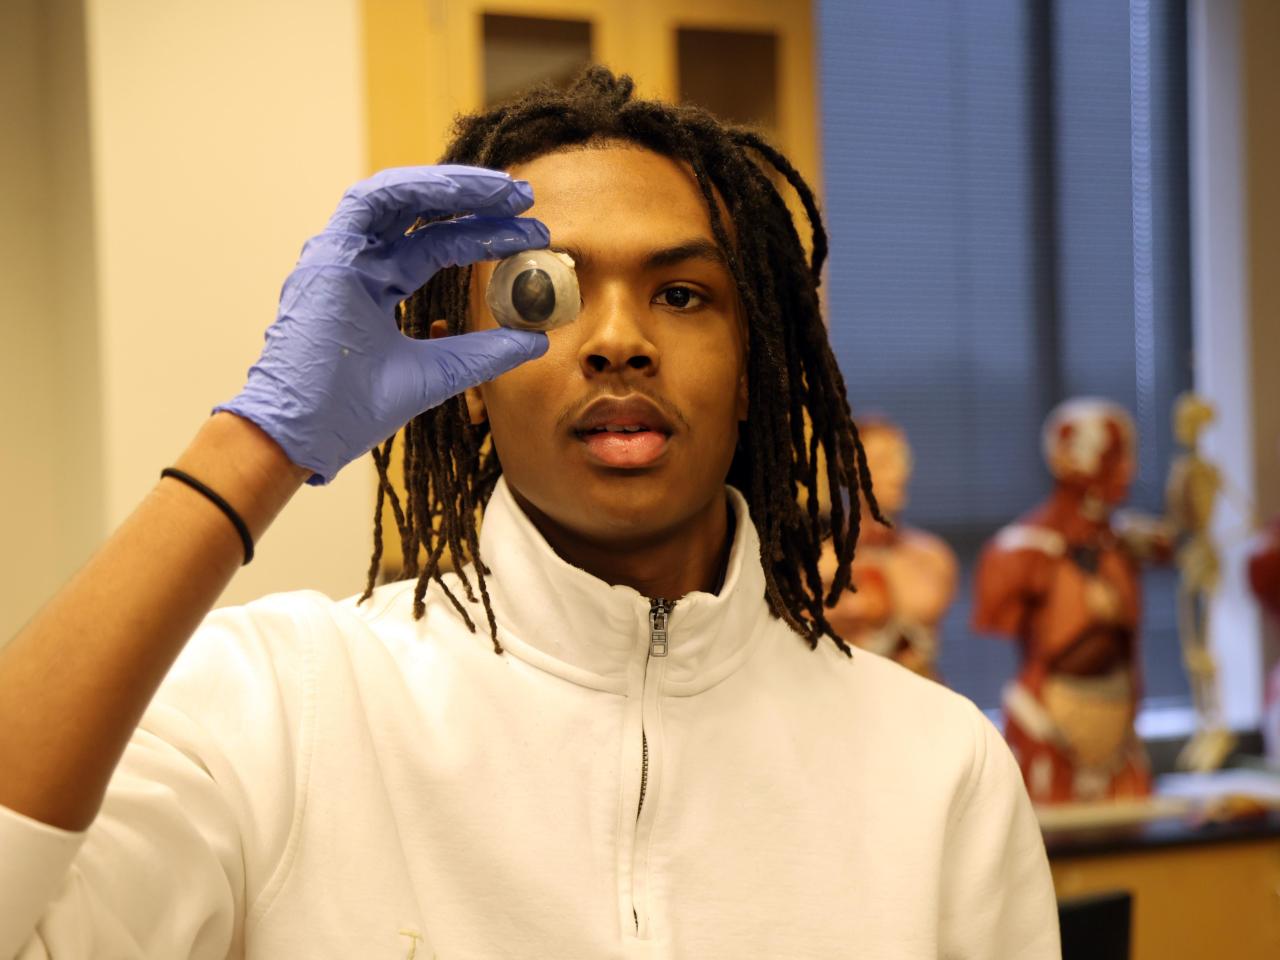 A student holds a cow eye in front of his face